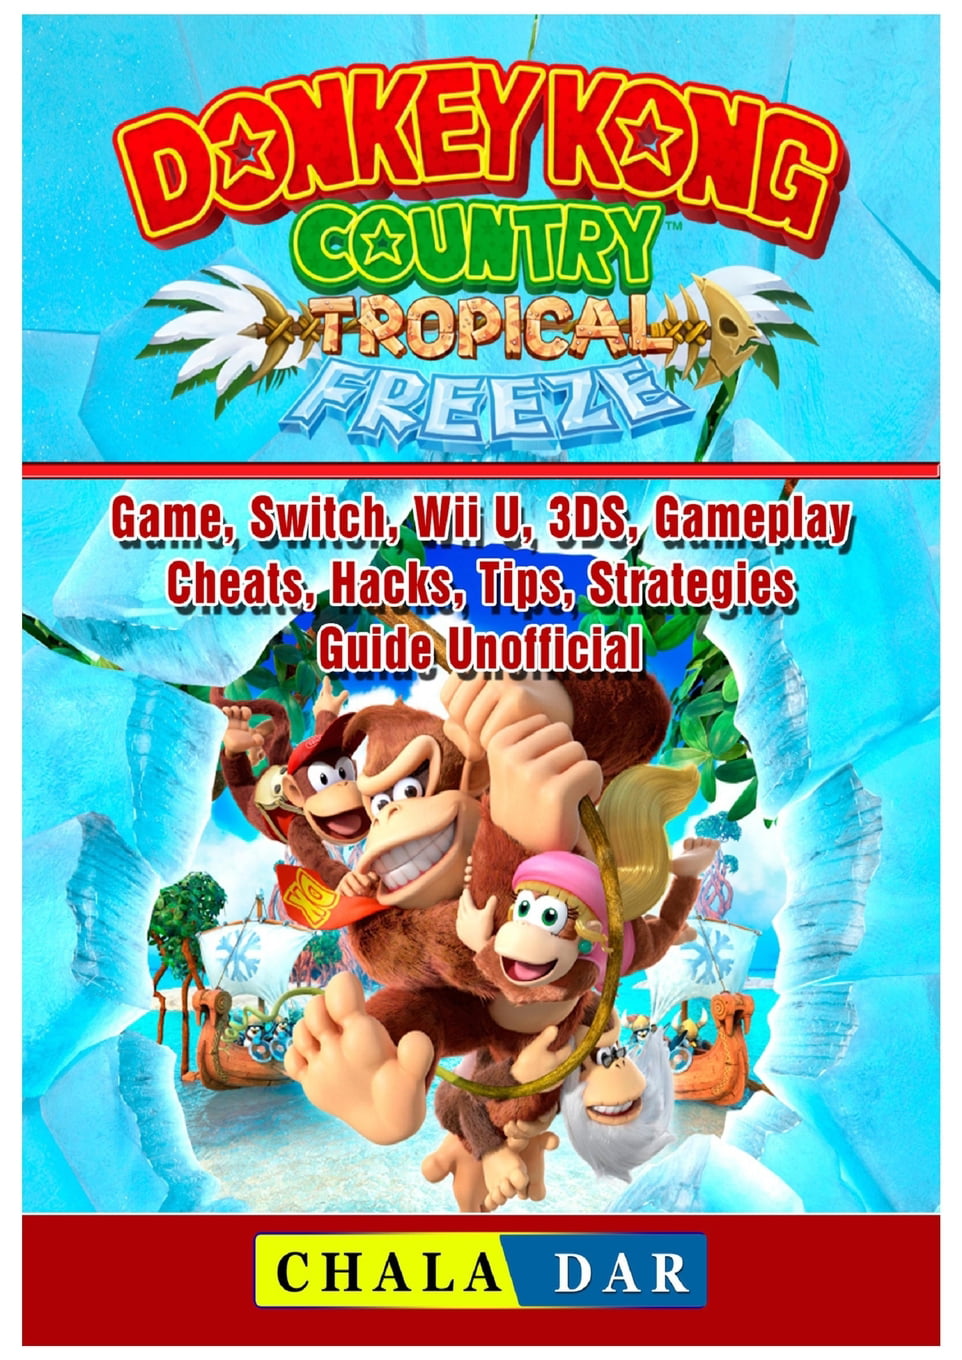 Donkey Kong Country Freeze Game, Switch, Wii U, 3ds, Gameplay, Cheats, Hacks, Strategies, Guide Unofficial - Walmart.com